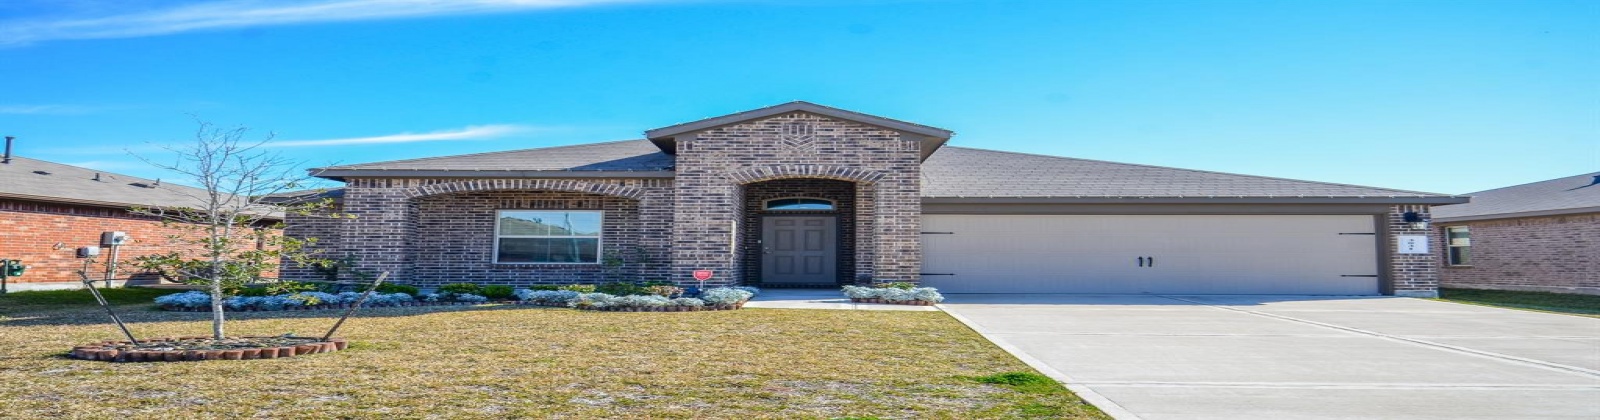 3031 Dripping Springs Court, Katy, Texas 77494, 3 Bedrooms Bedrooms, ,2 BathroomsBathrooms,1 Story Home,For Sale,Dripping Springs Court,1,1010